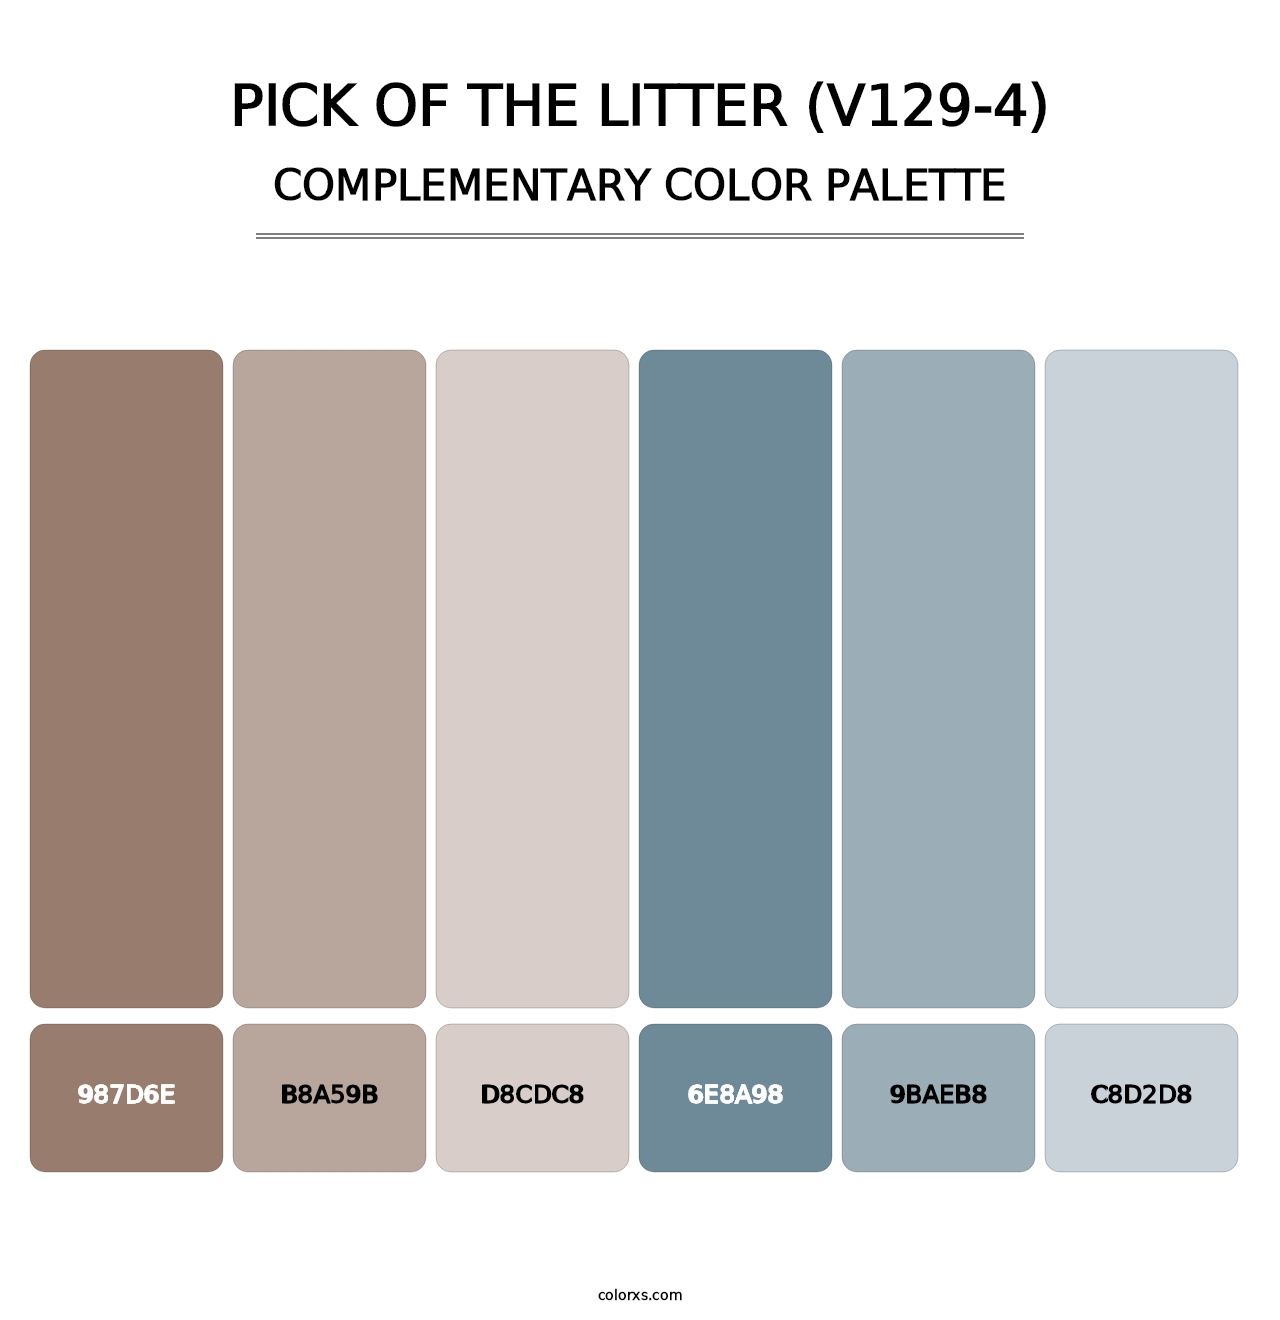 Pick of the Litter (V129-4) - Complementary Color Palette